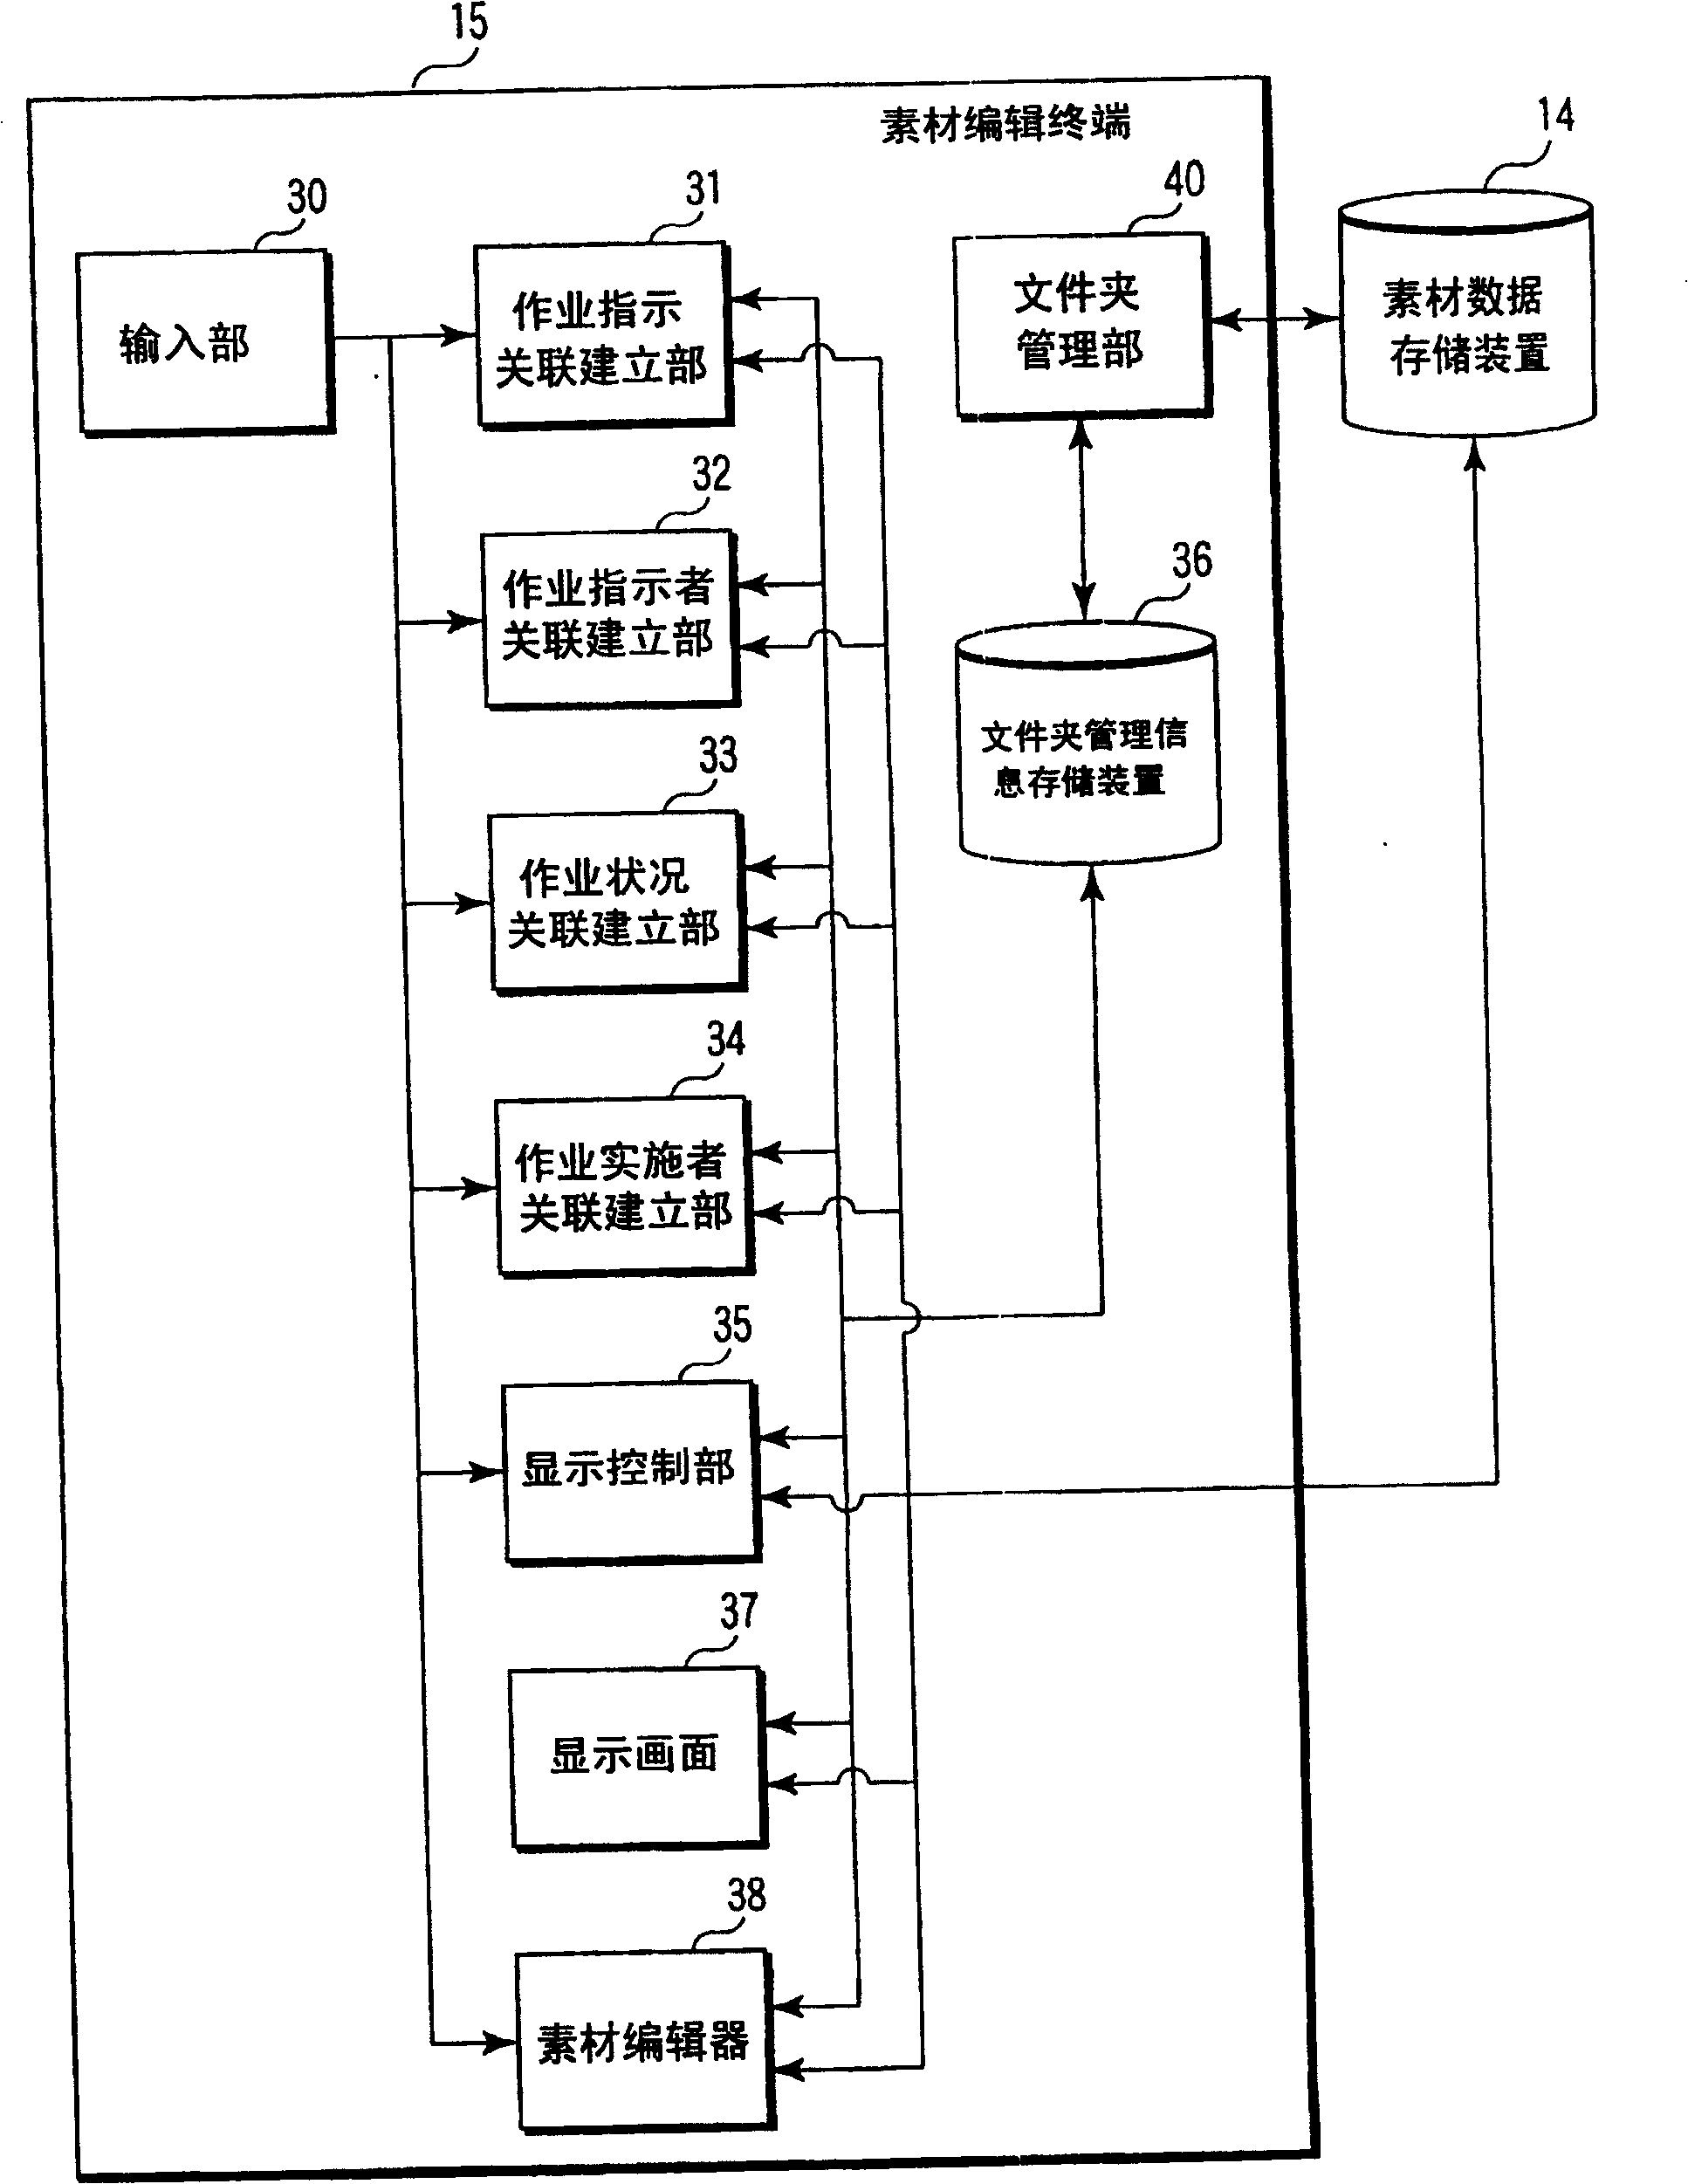 System and method for raw data management